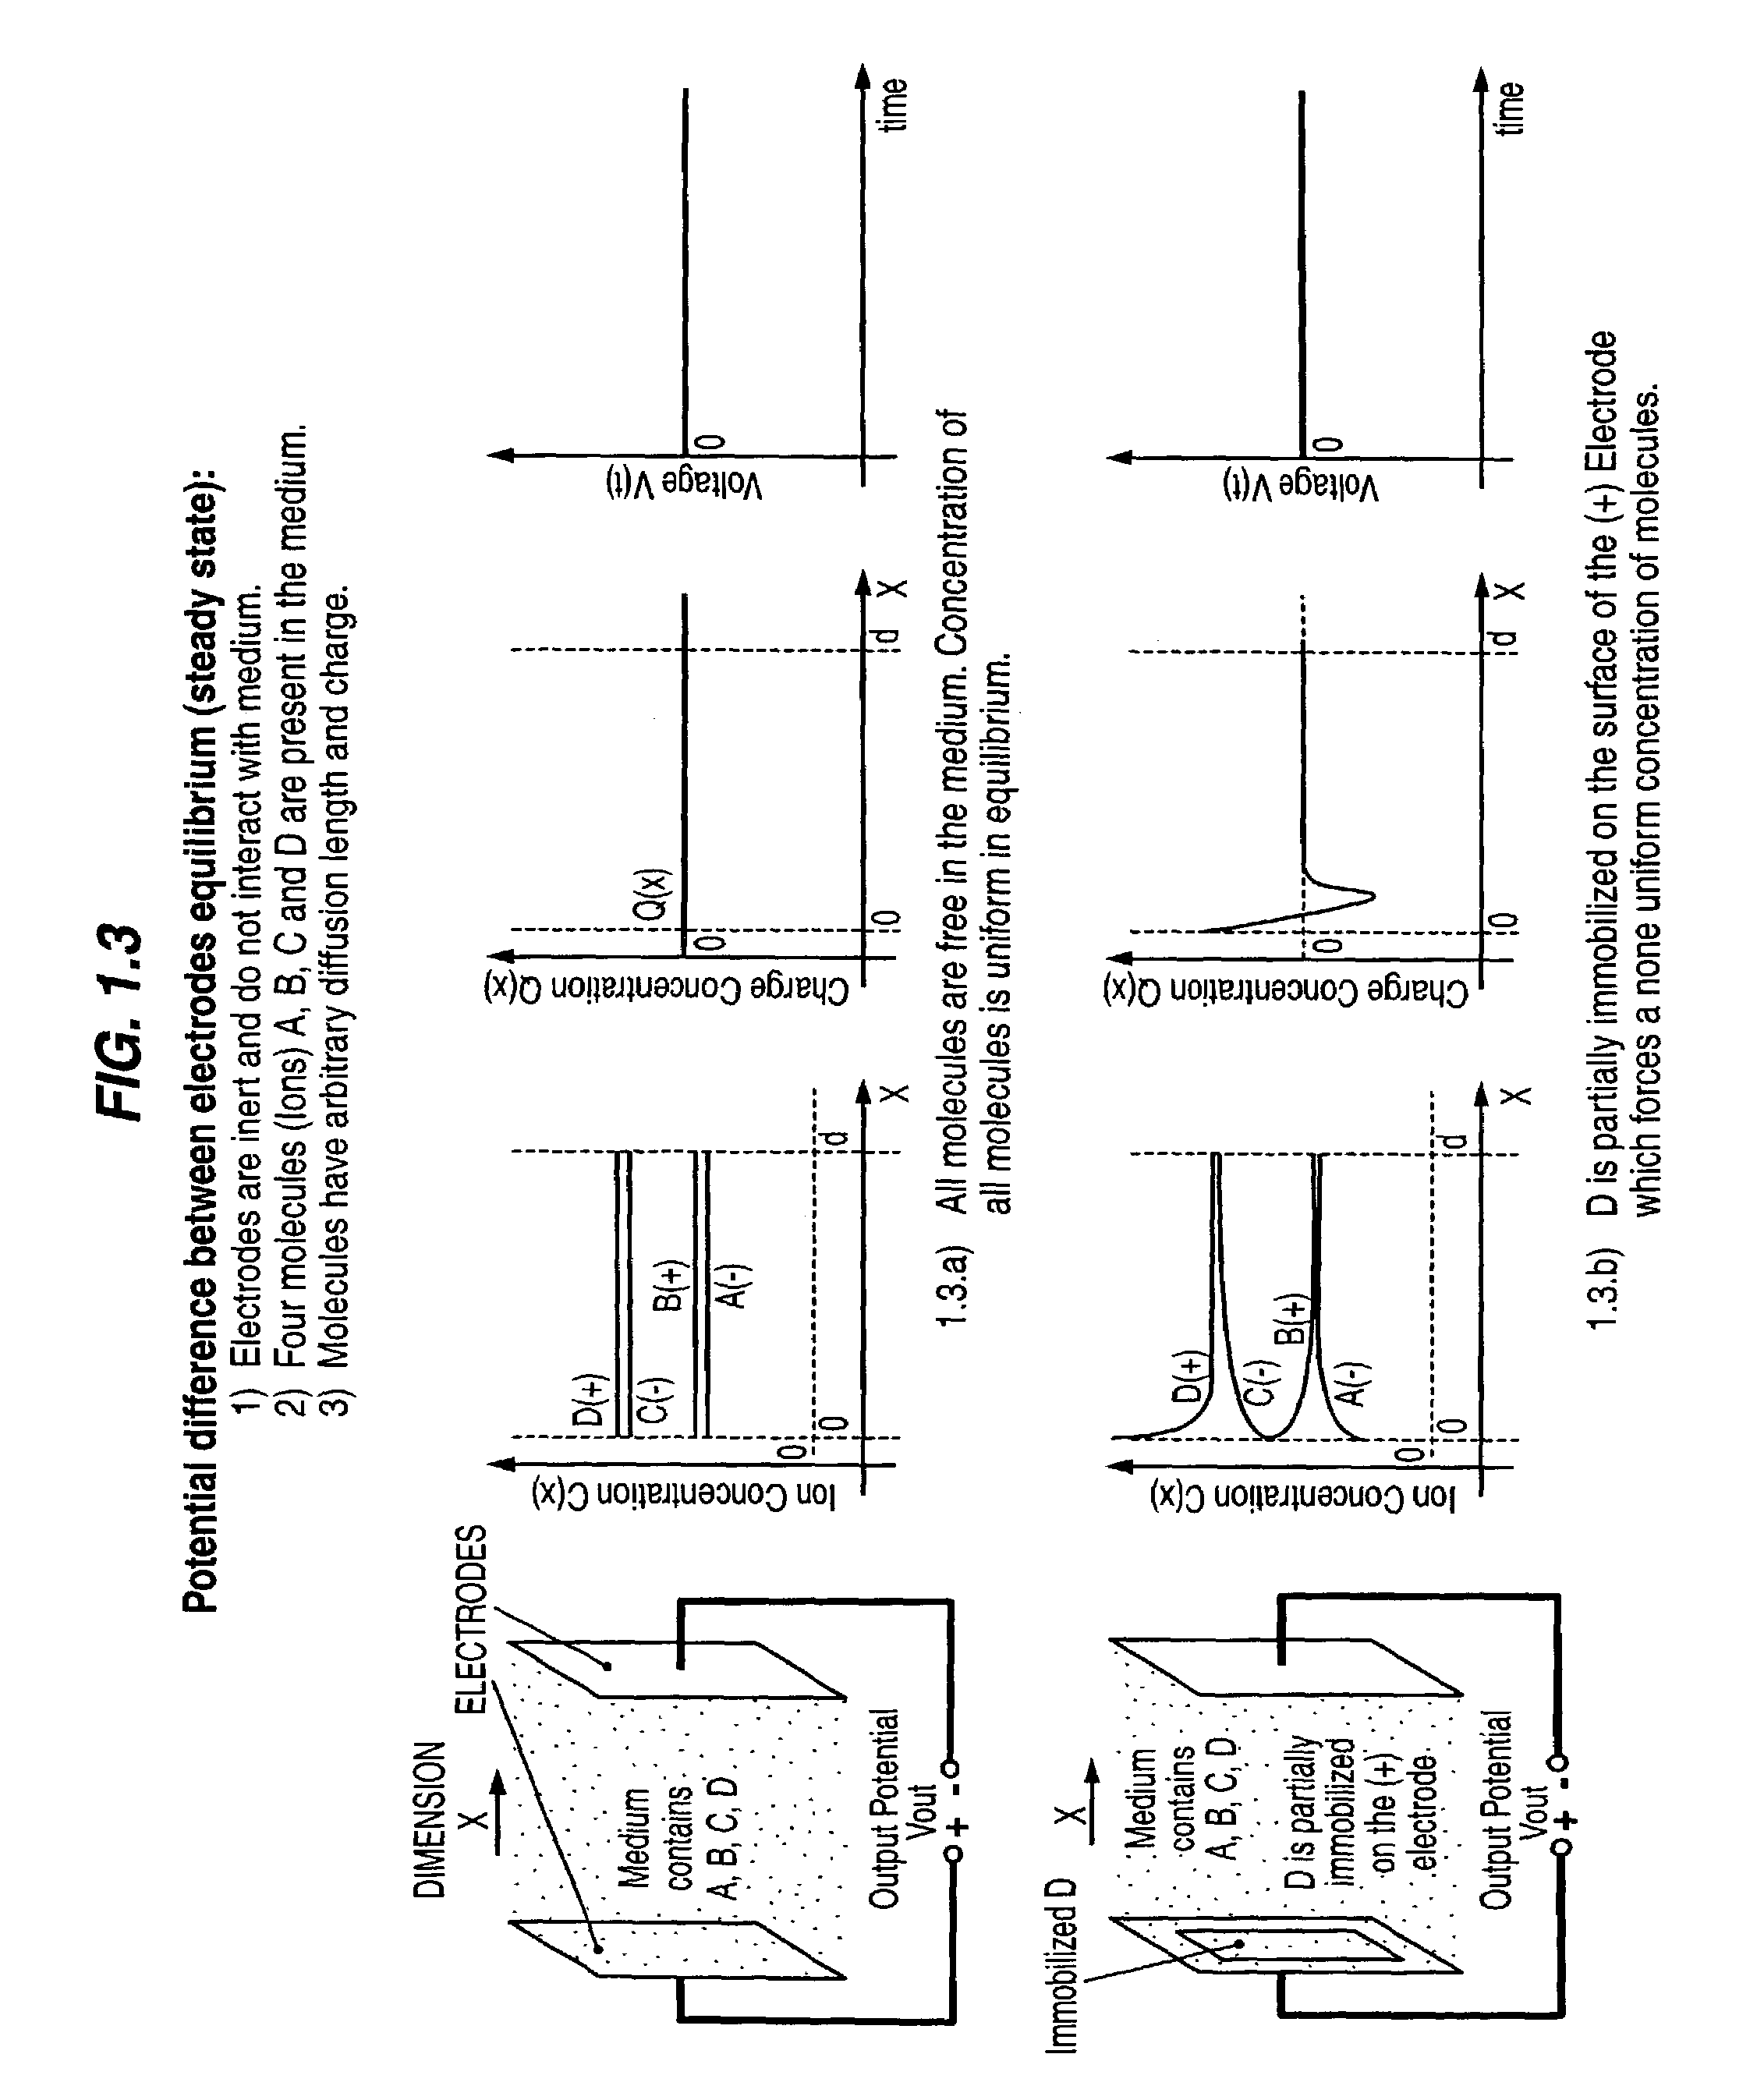 Transient electrical signal based methods and devices for characterizing molecular interaction and/or motion in a sample